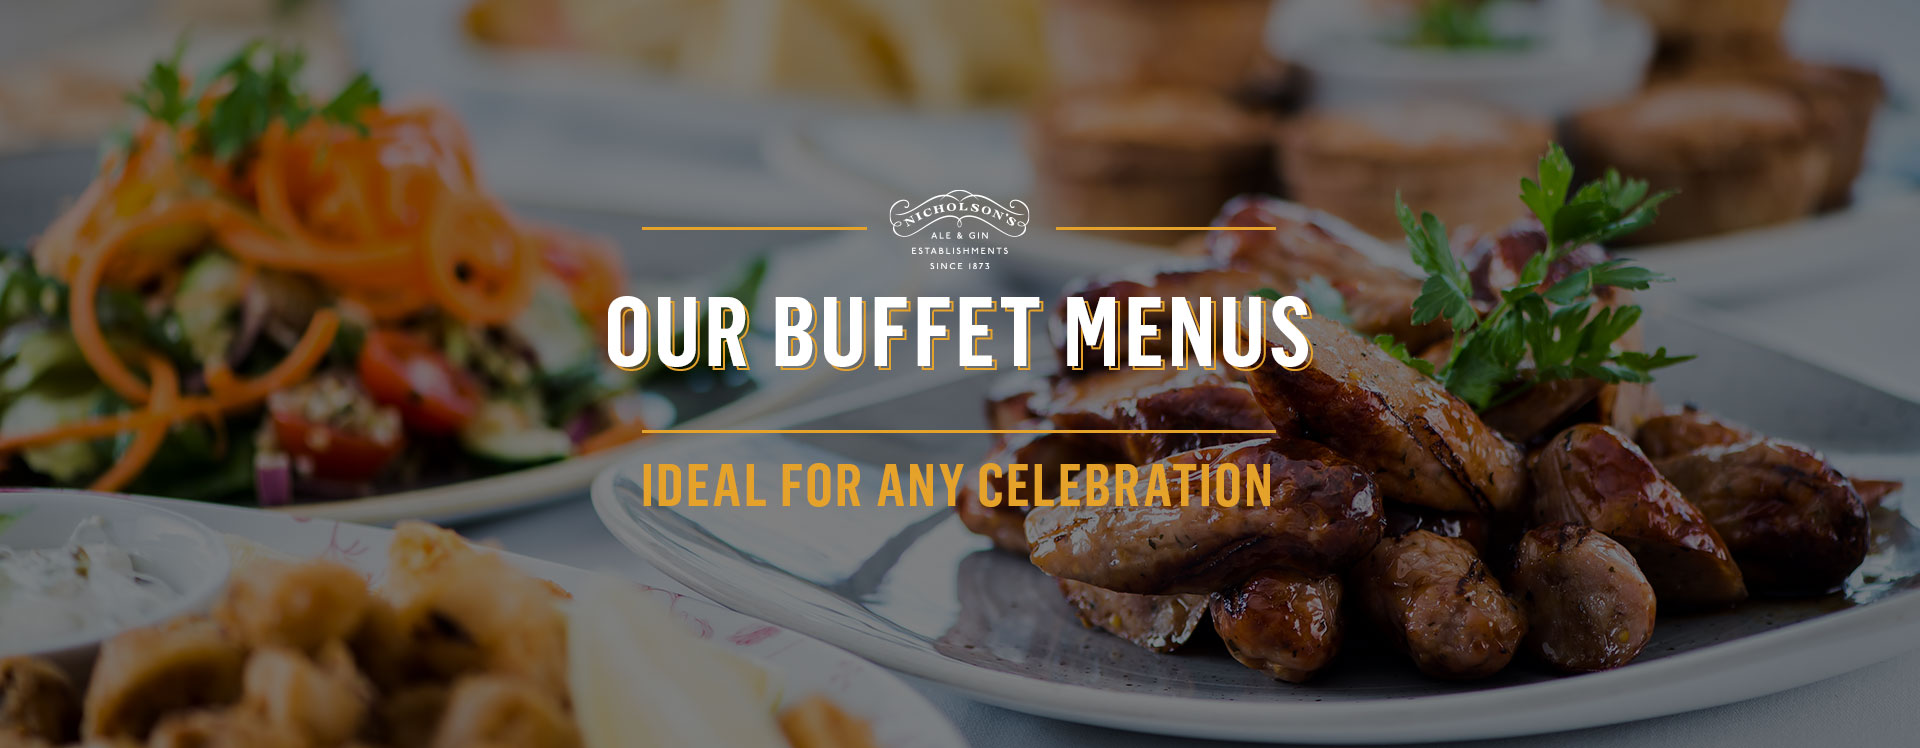 Buffet menu at The Sir Christopher Hatton - Book a table